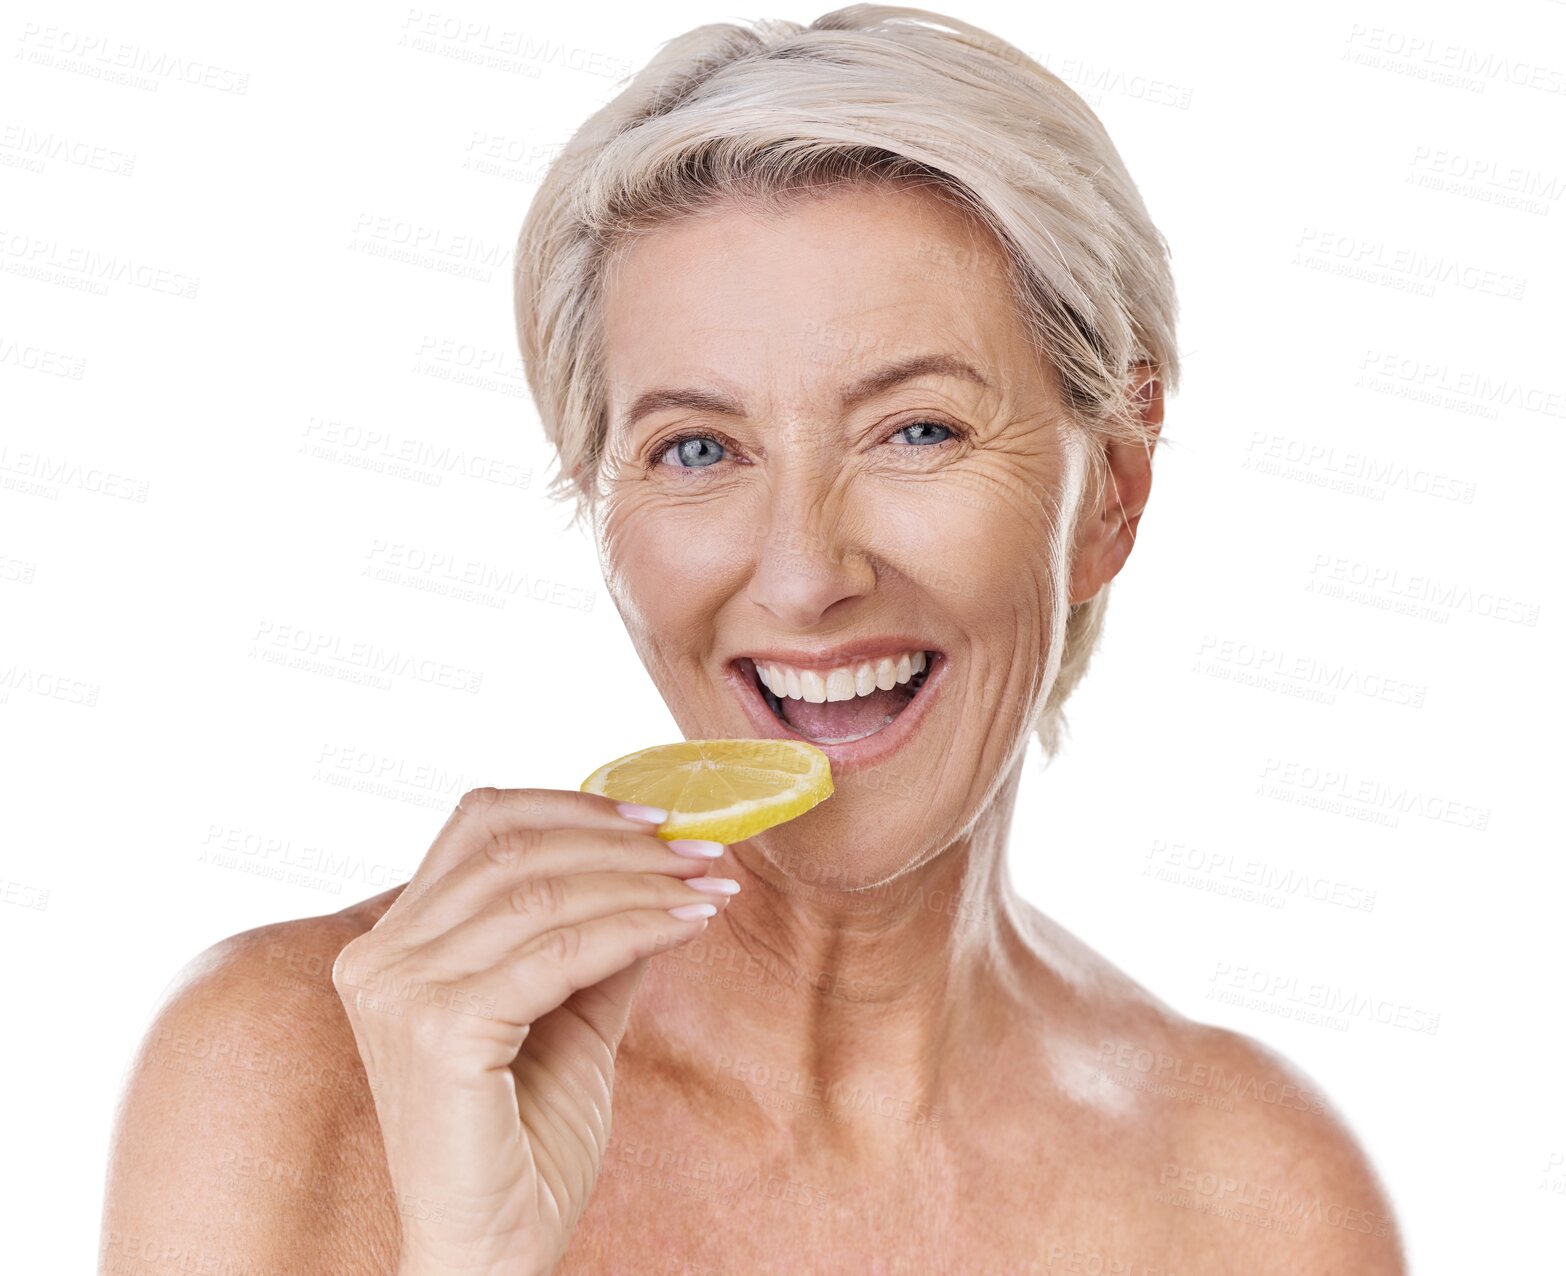 Buy stock photo Isolated senior woman, lemon and nutrition in portrait, smile and eating by transparent png background. Happy mature lady, model and vitamin c with fruit, diet and organic choice for natural detox